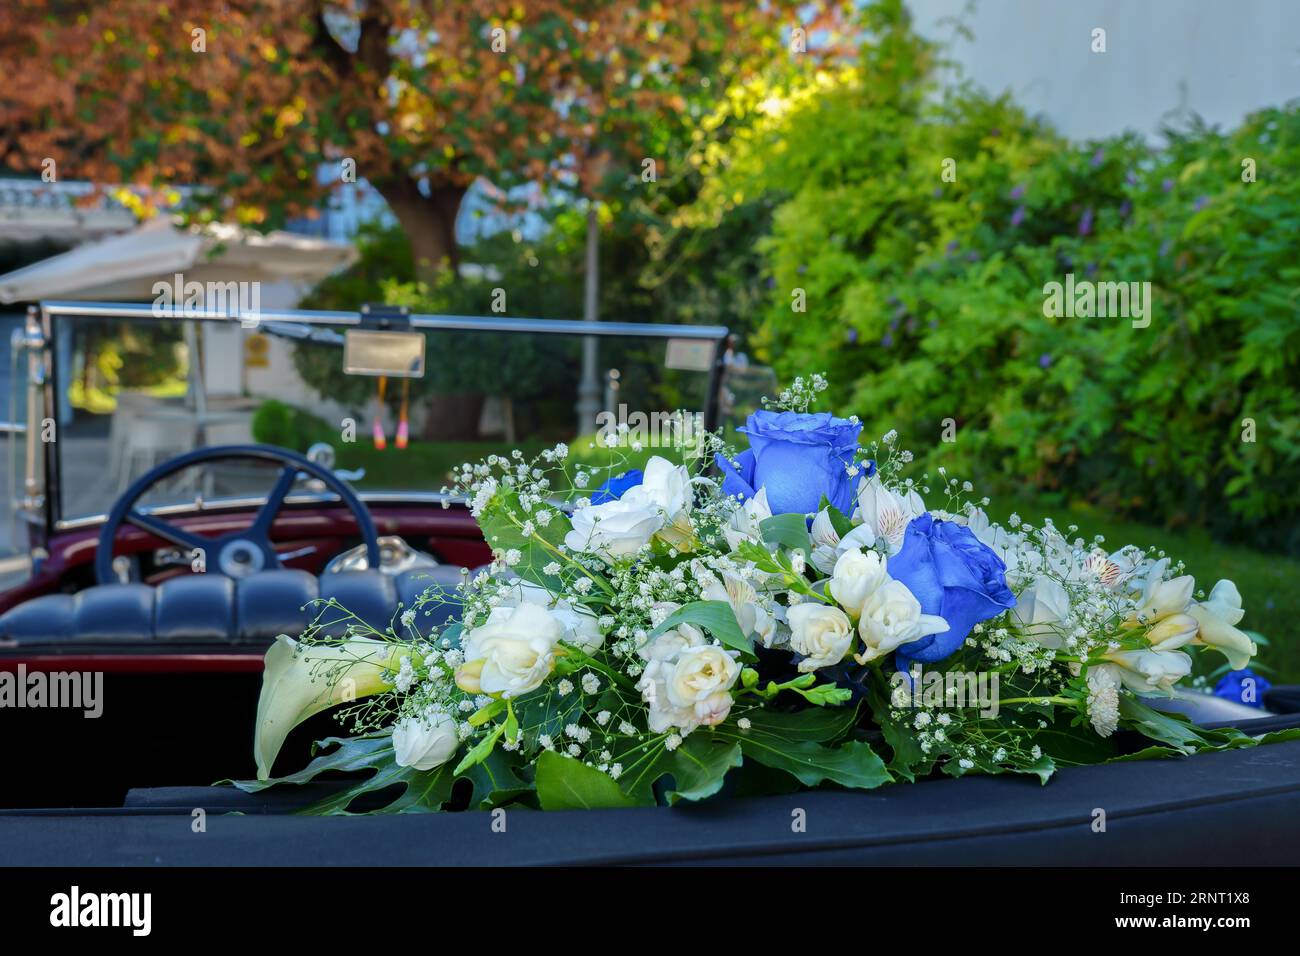 16,208 Car Decorations Wedding Royalty-Free Photos and Stock Images